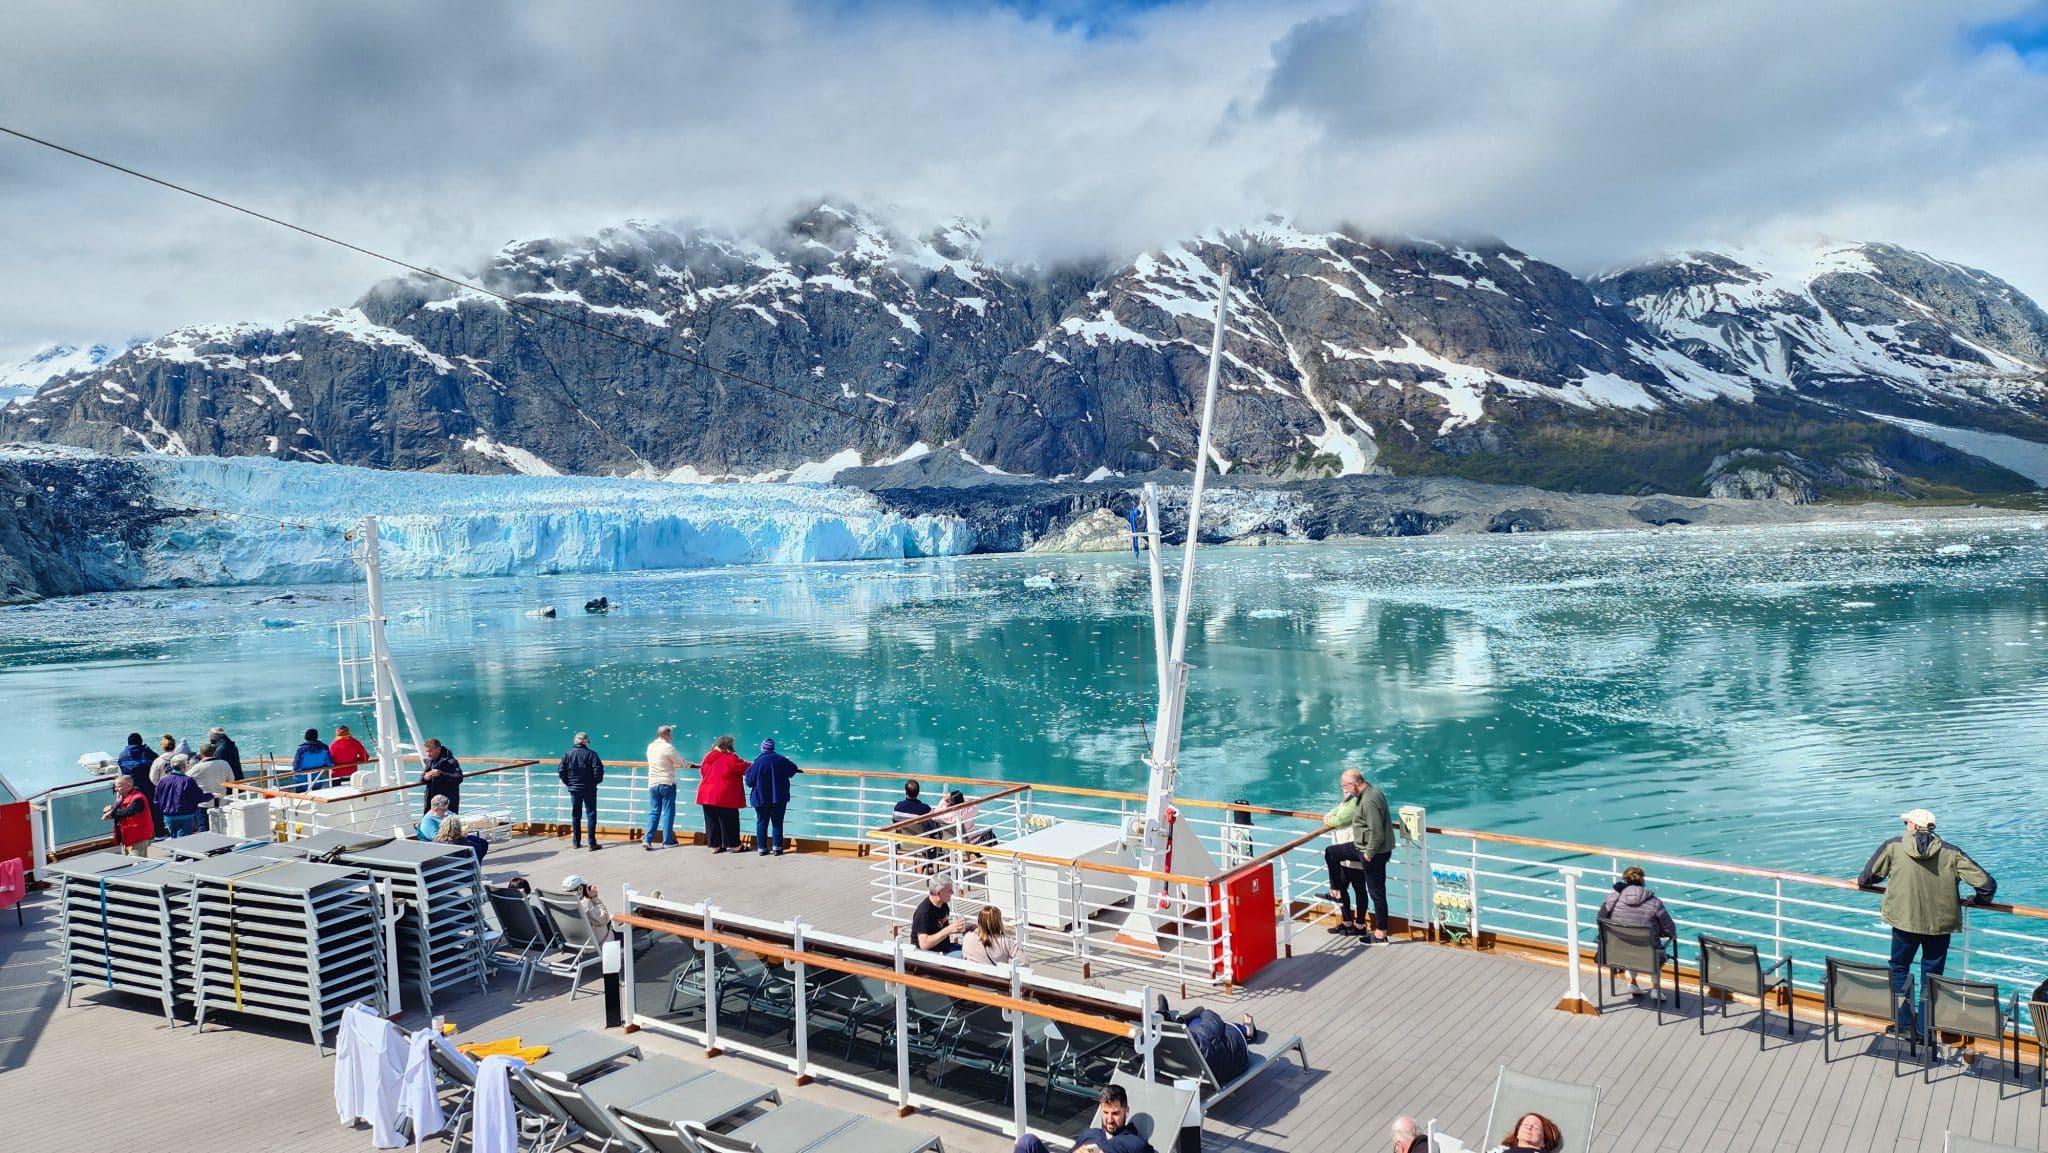 10 Reasons Why Your Cruise to Alaska Should Be on Holland America Line